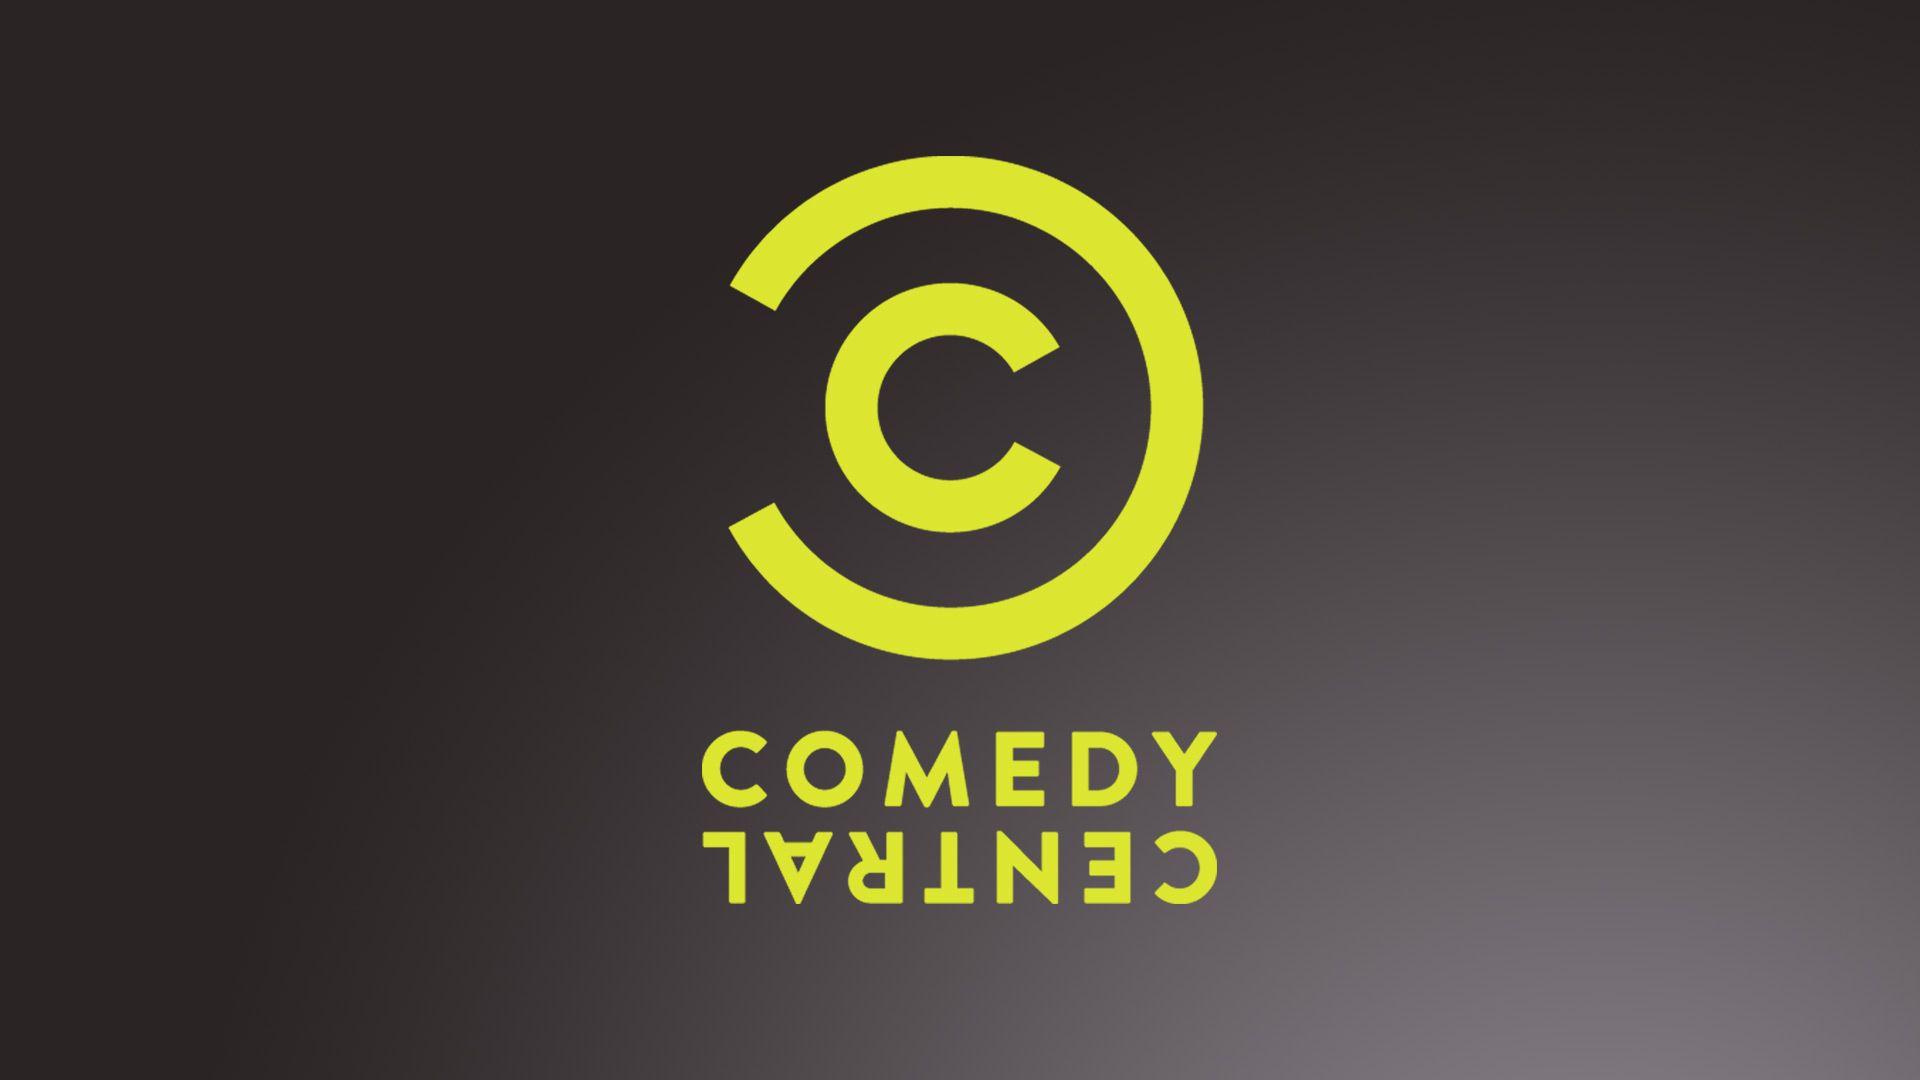 Cool Pictures of Central Rap Logo - Comedy Central Official Site - TV Show Full Episodes & Funny Video Clips